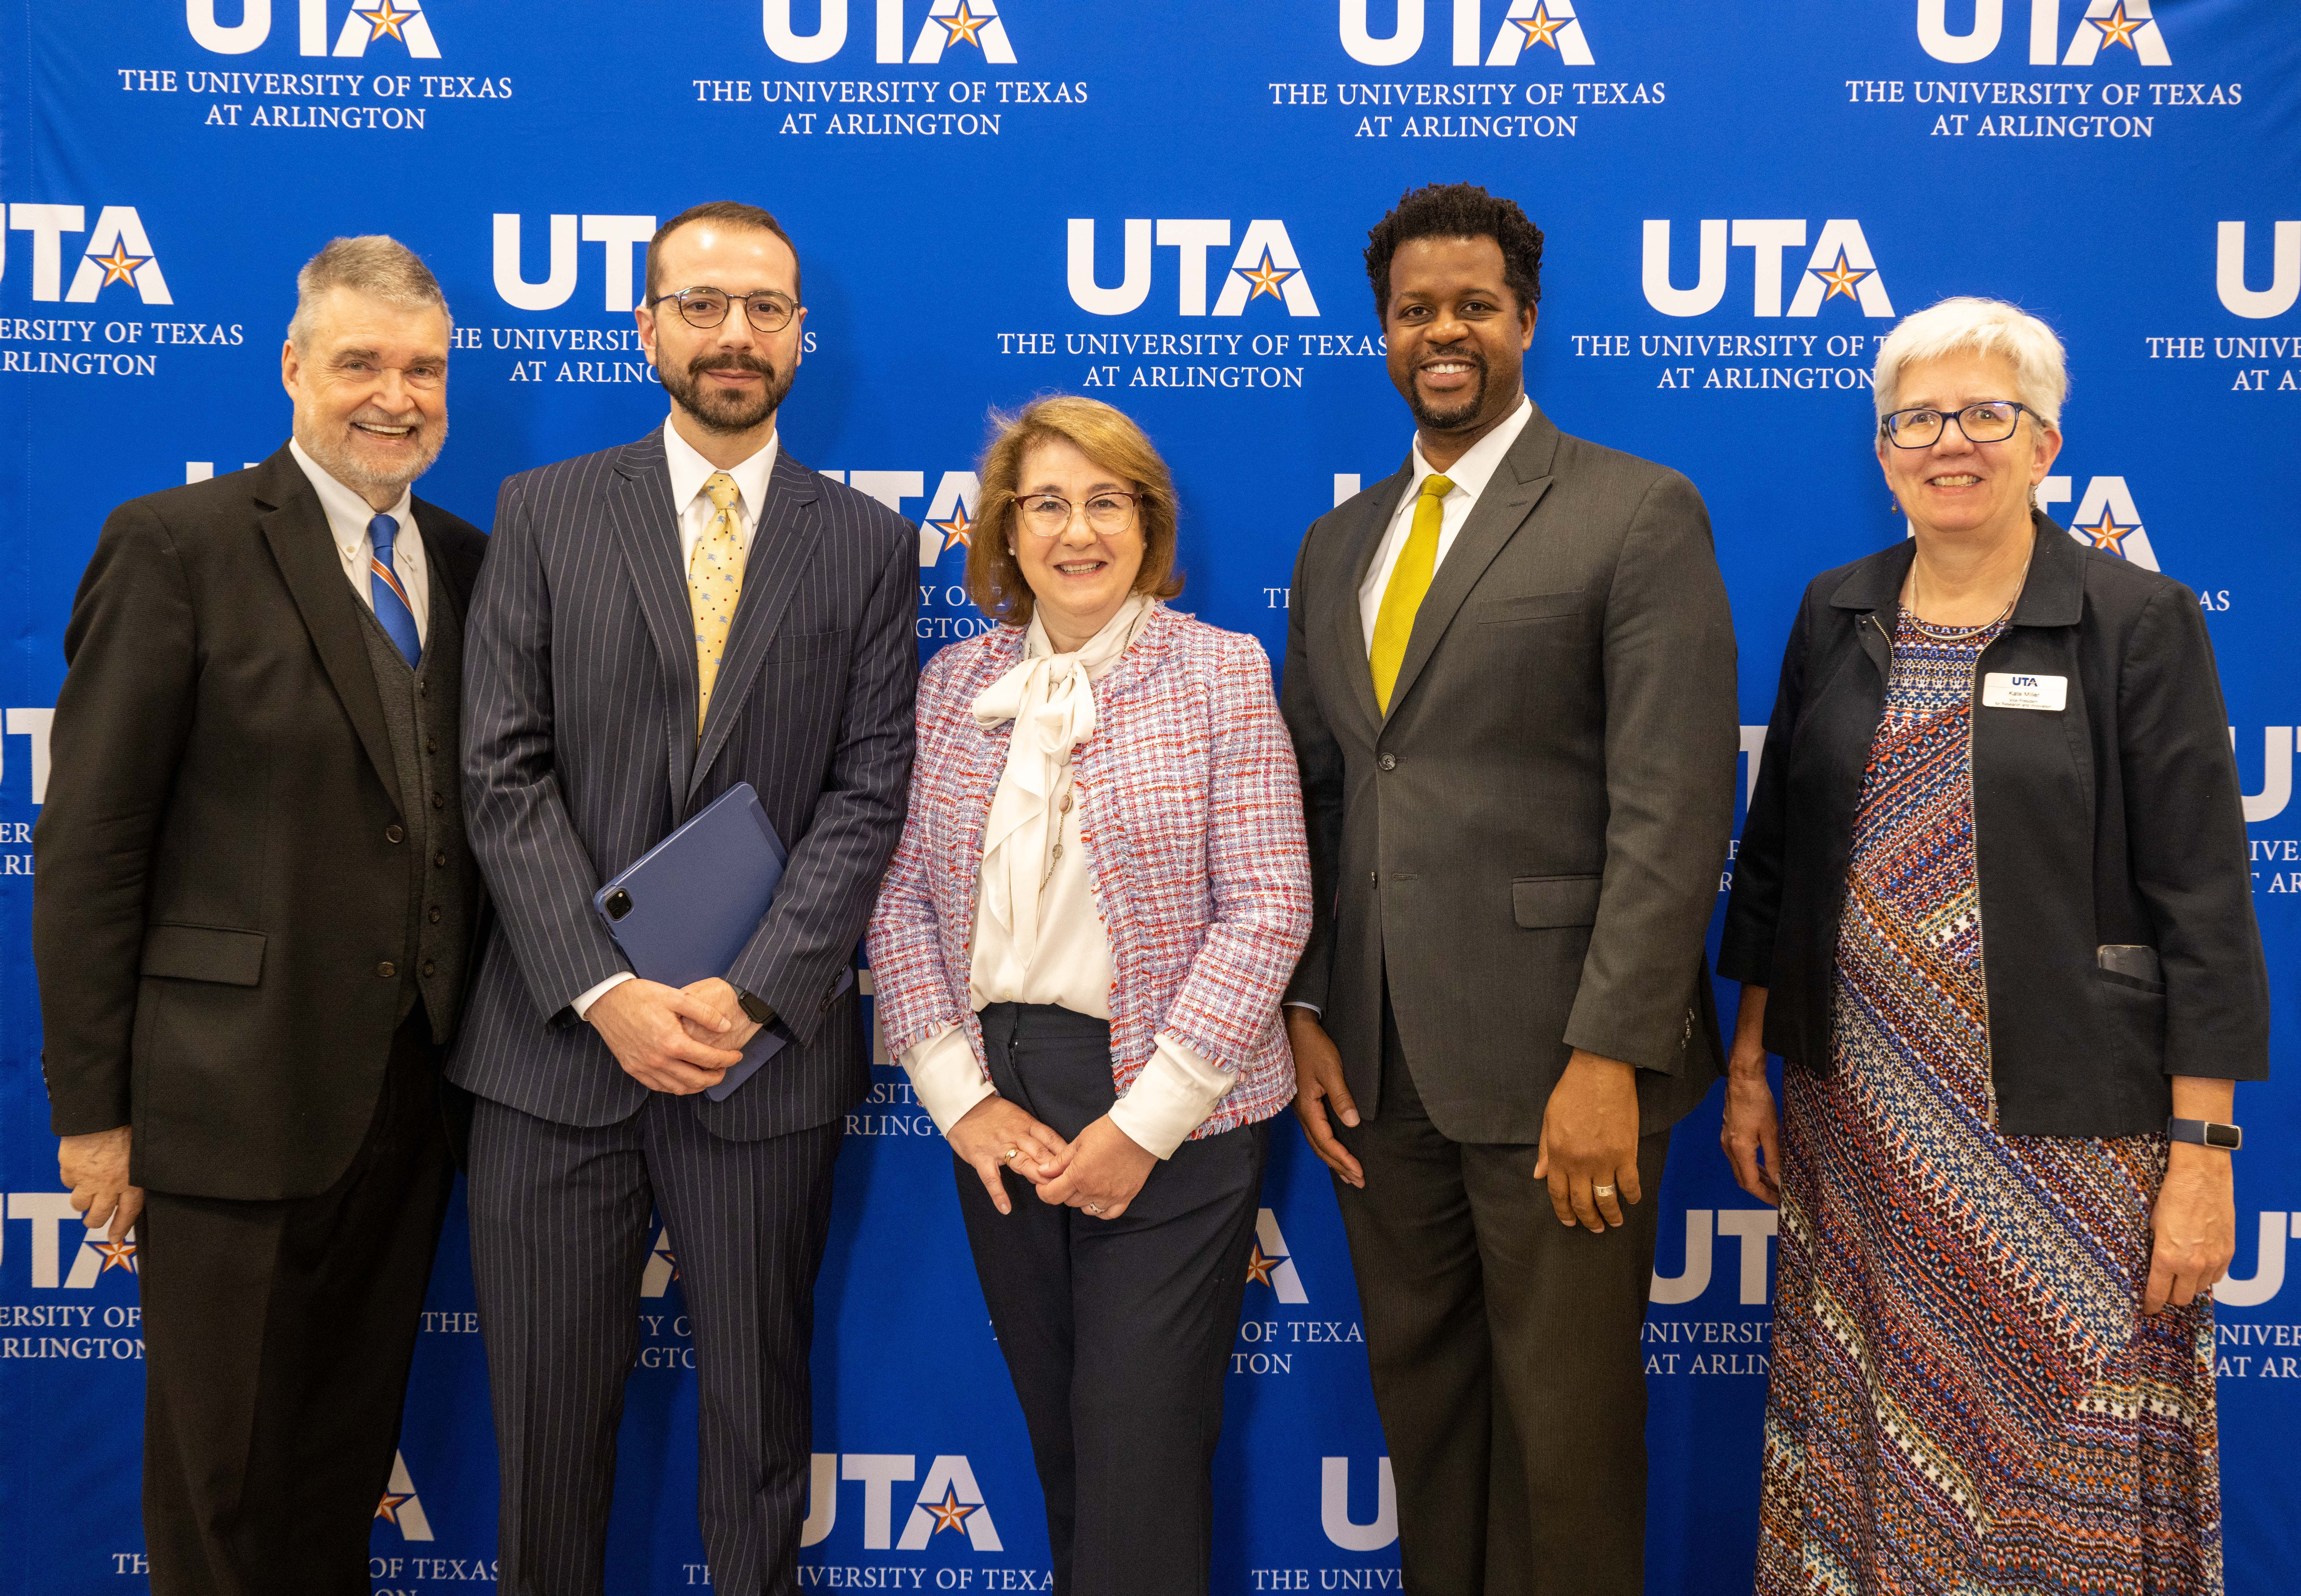 U.S. Department of Transportation funding UTA research with five-year, $10 million grant